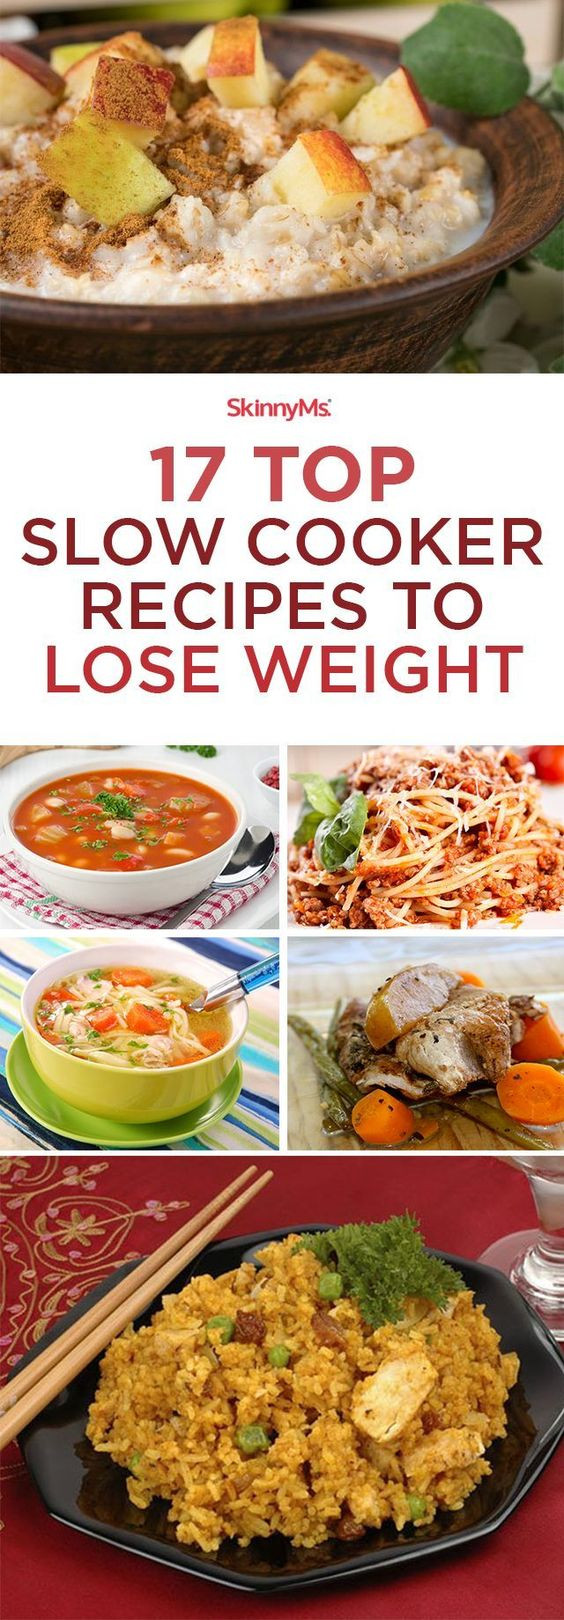 Weight Loss Slow Cooker Recipes
 17 Top Slow Cooker Recipes to Lose Weight